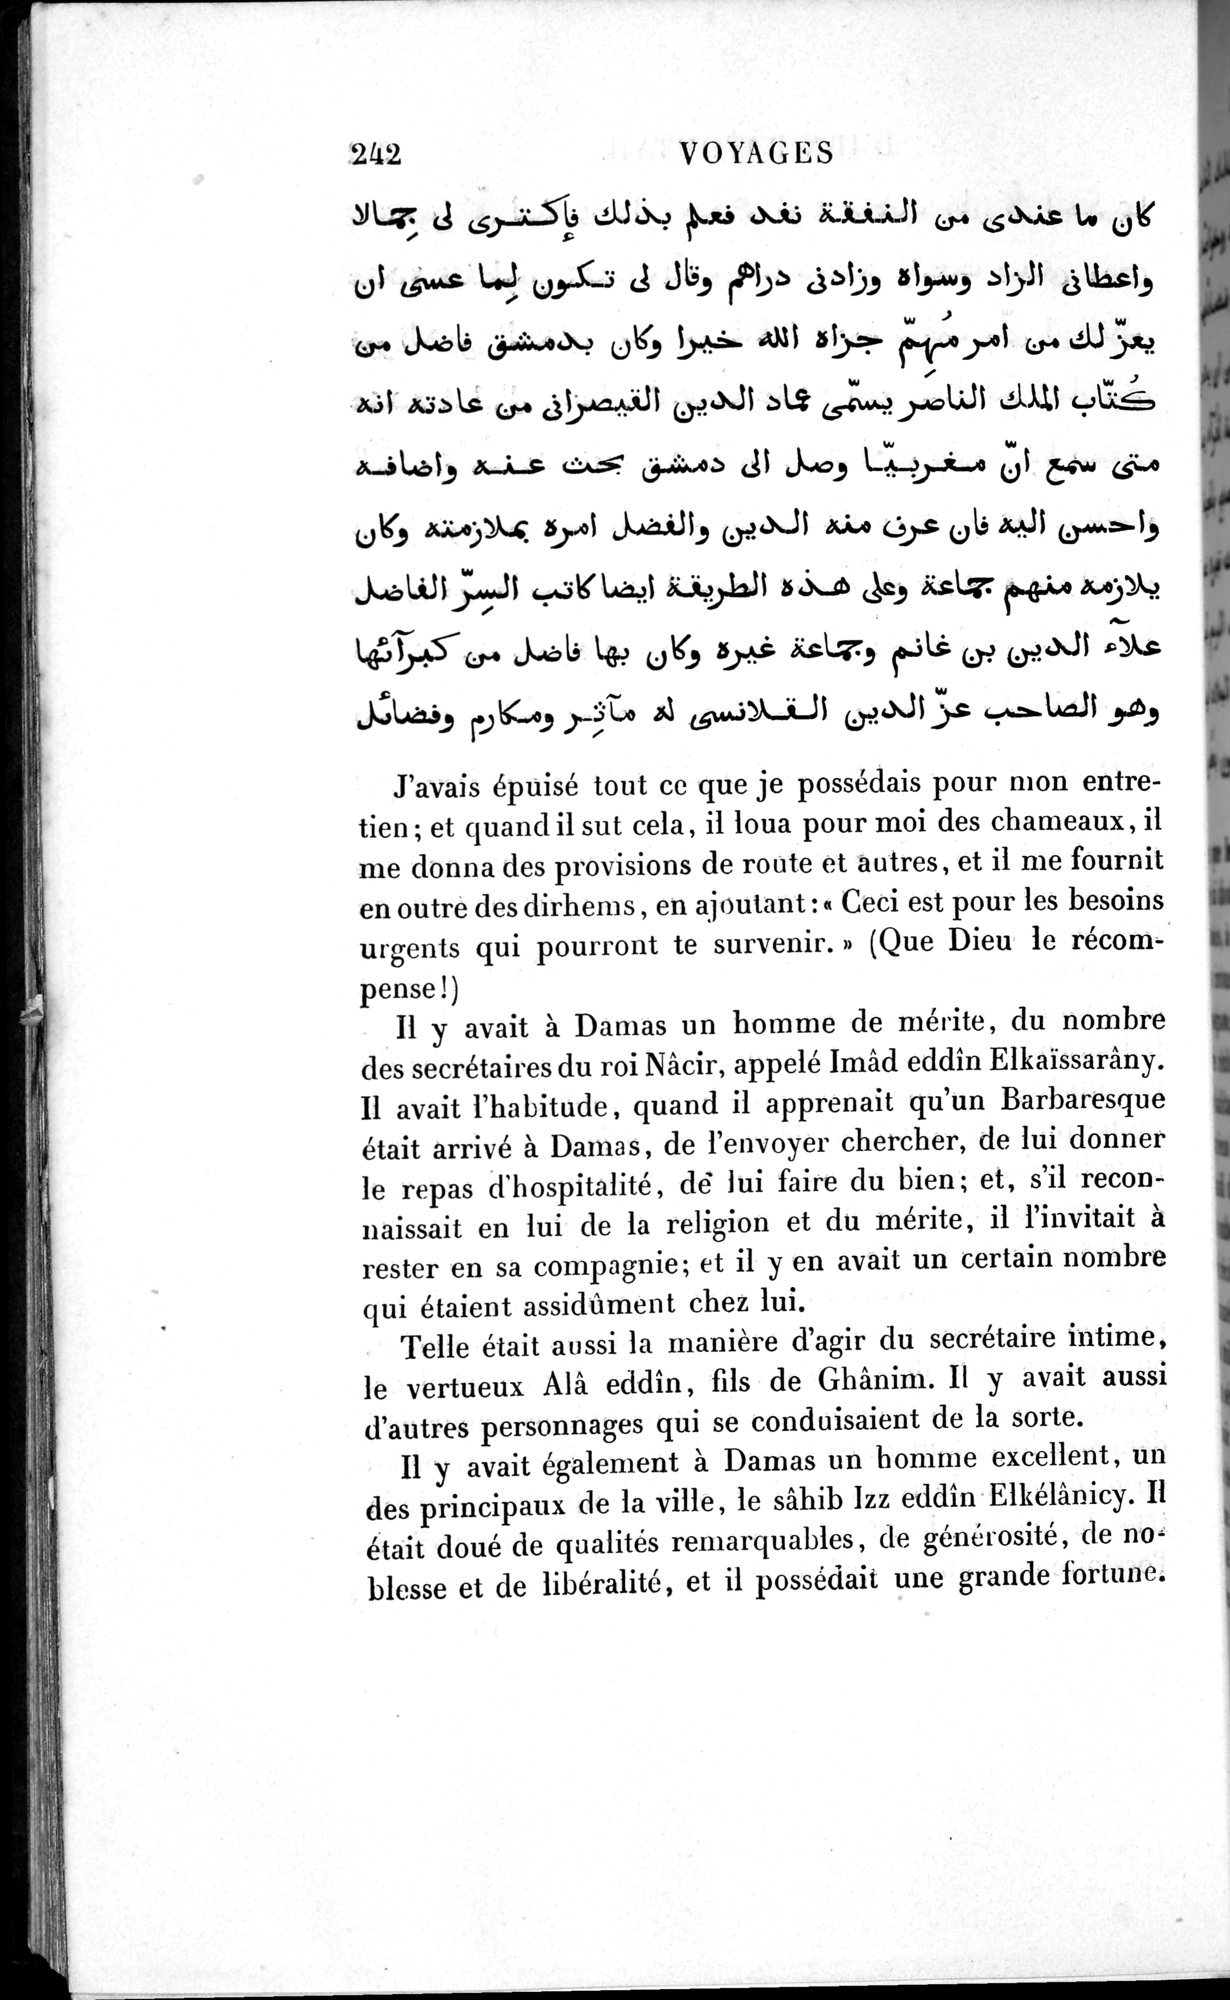 Voyages d'Ibn Batoutah : vol.1 / Page 302 (Grayscale High Resolution Image)